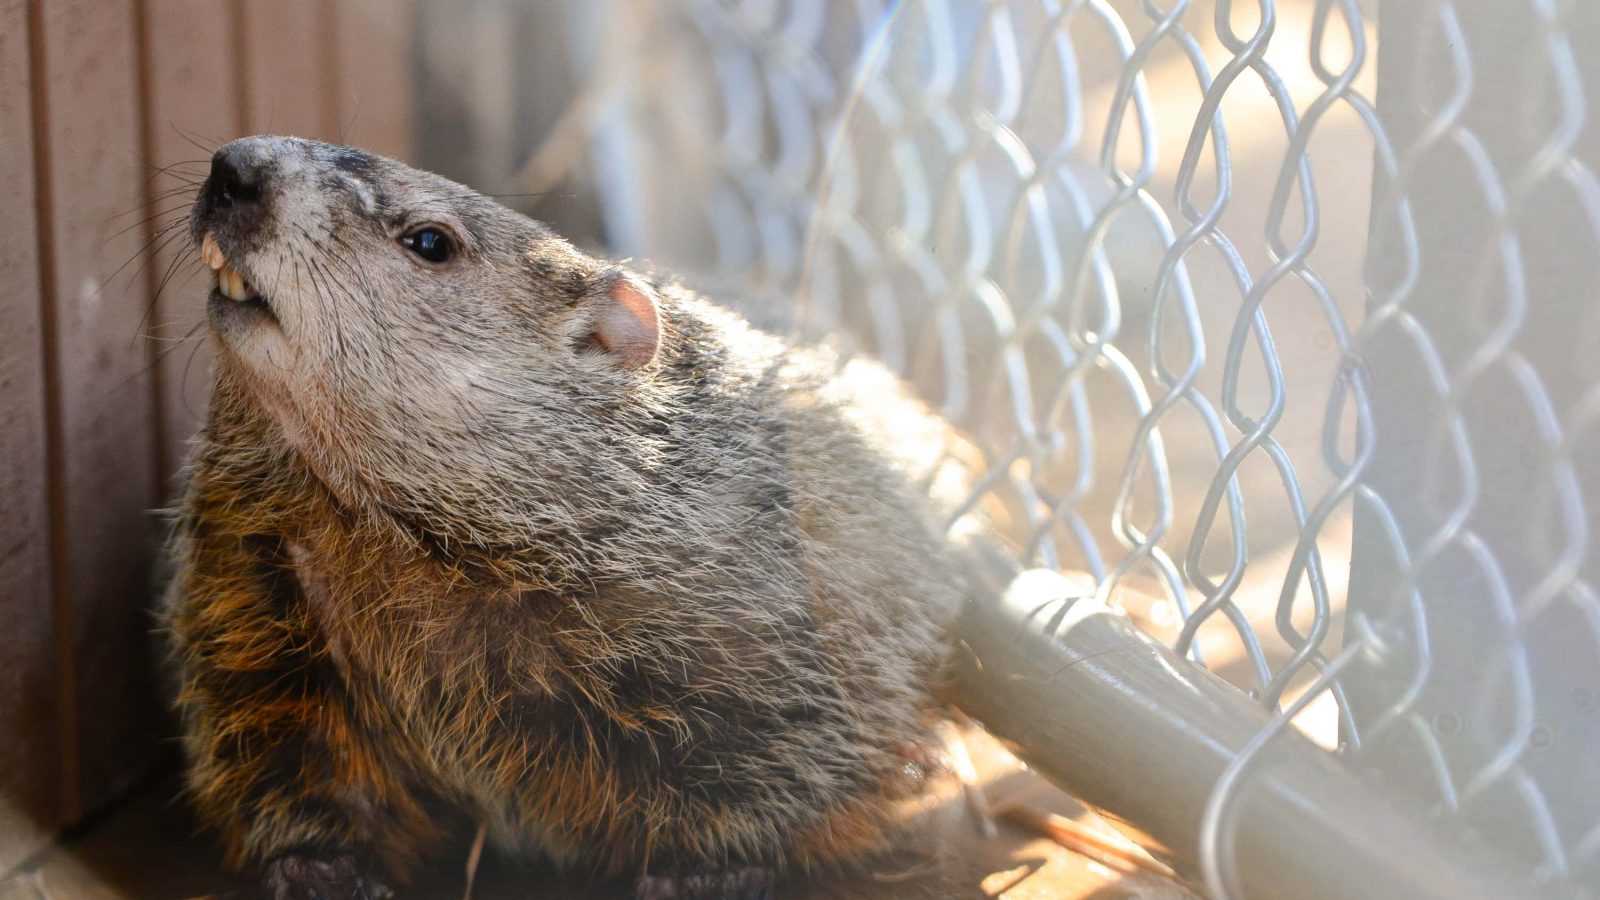 A groundhog can be seen turning up its snout next to a wire mesh fence. A lense flare is apparent throughout the frame, emanating from the center top of frame